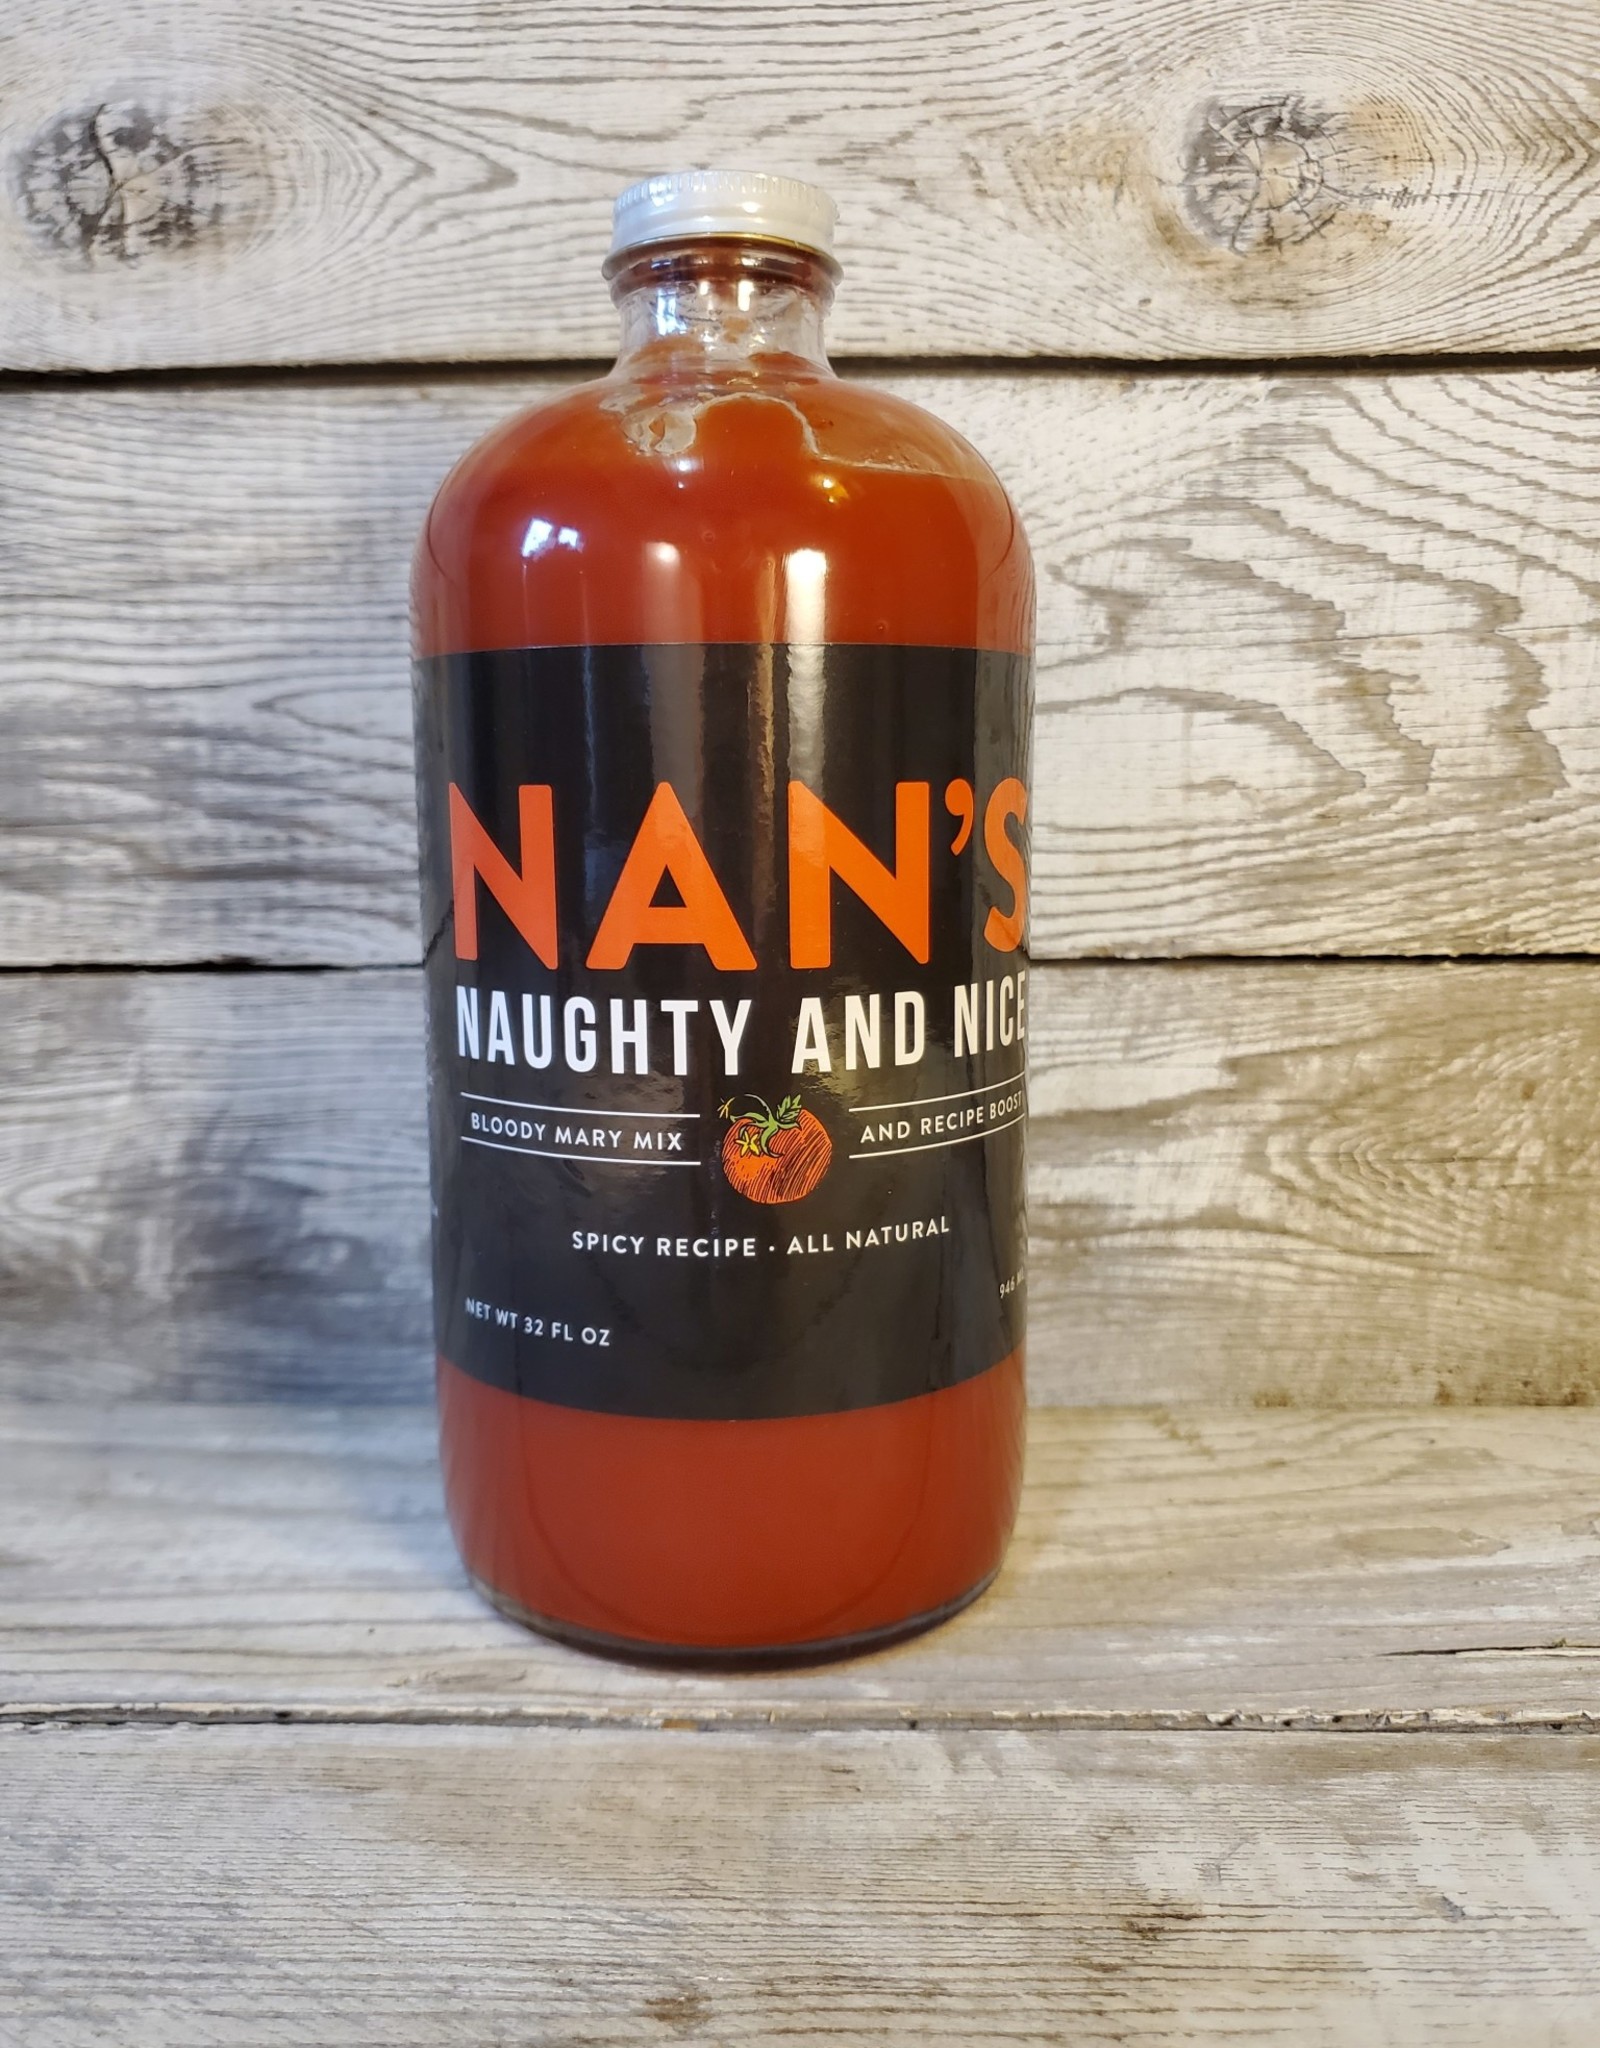 Nan's Naughty and Nice Nan's Bloody Mary Mix - Spicy